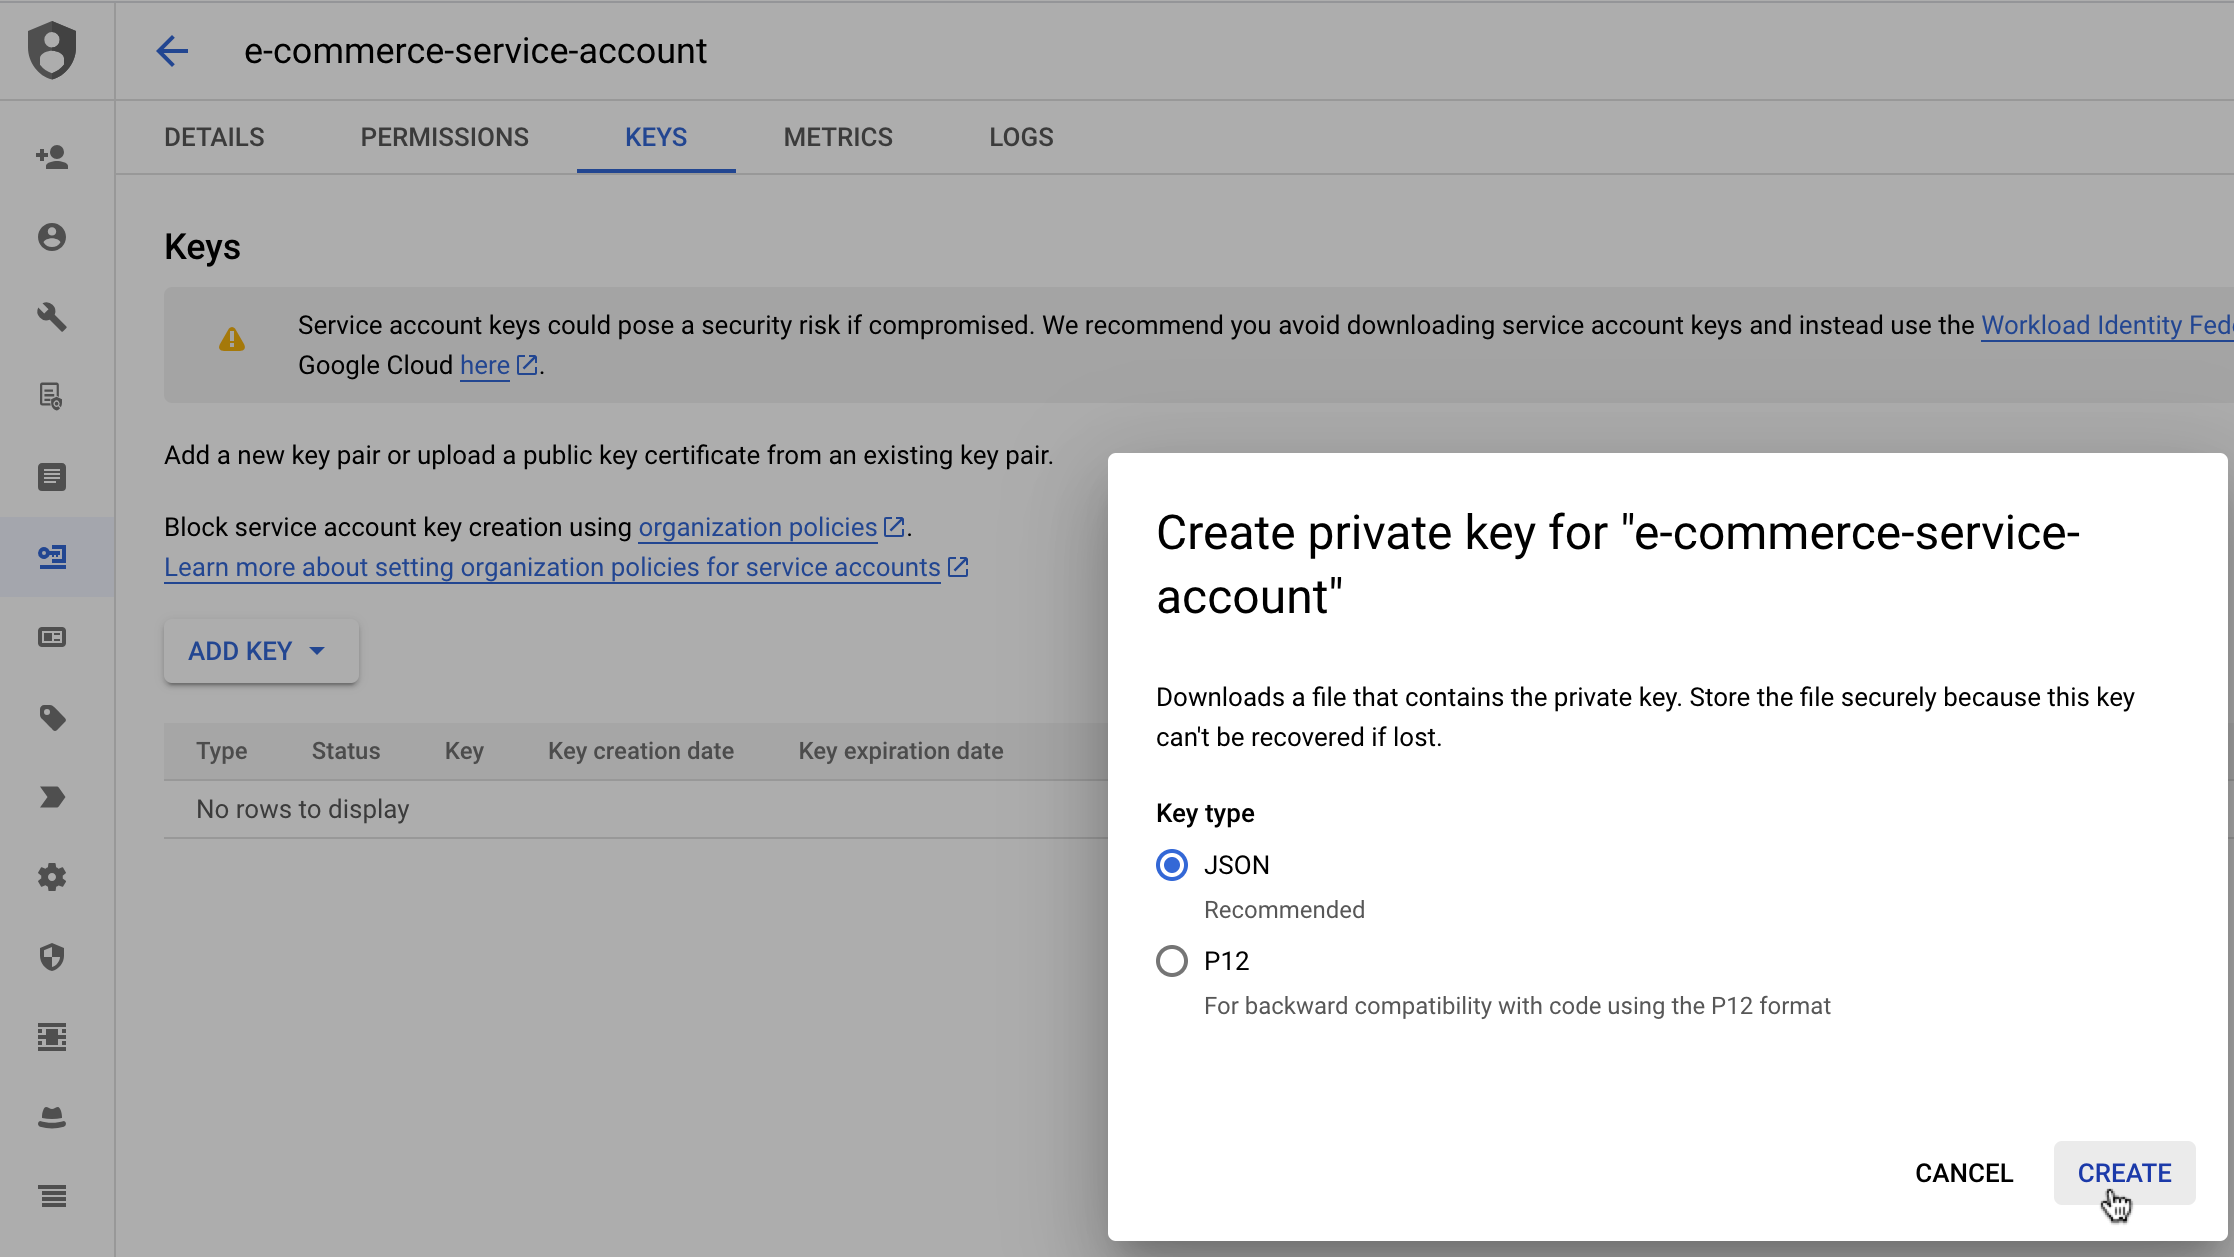 Creating JSON key for the service account